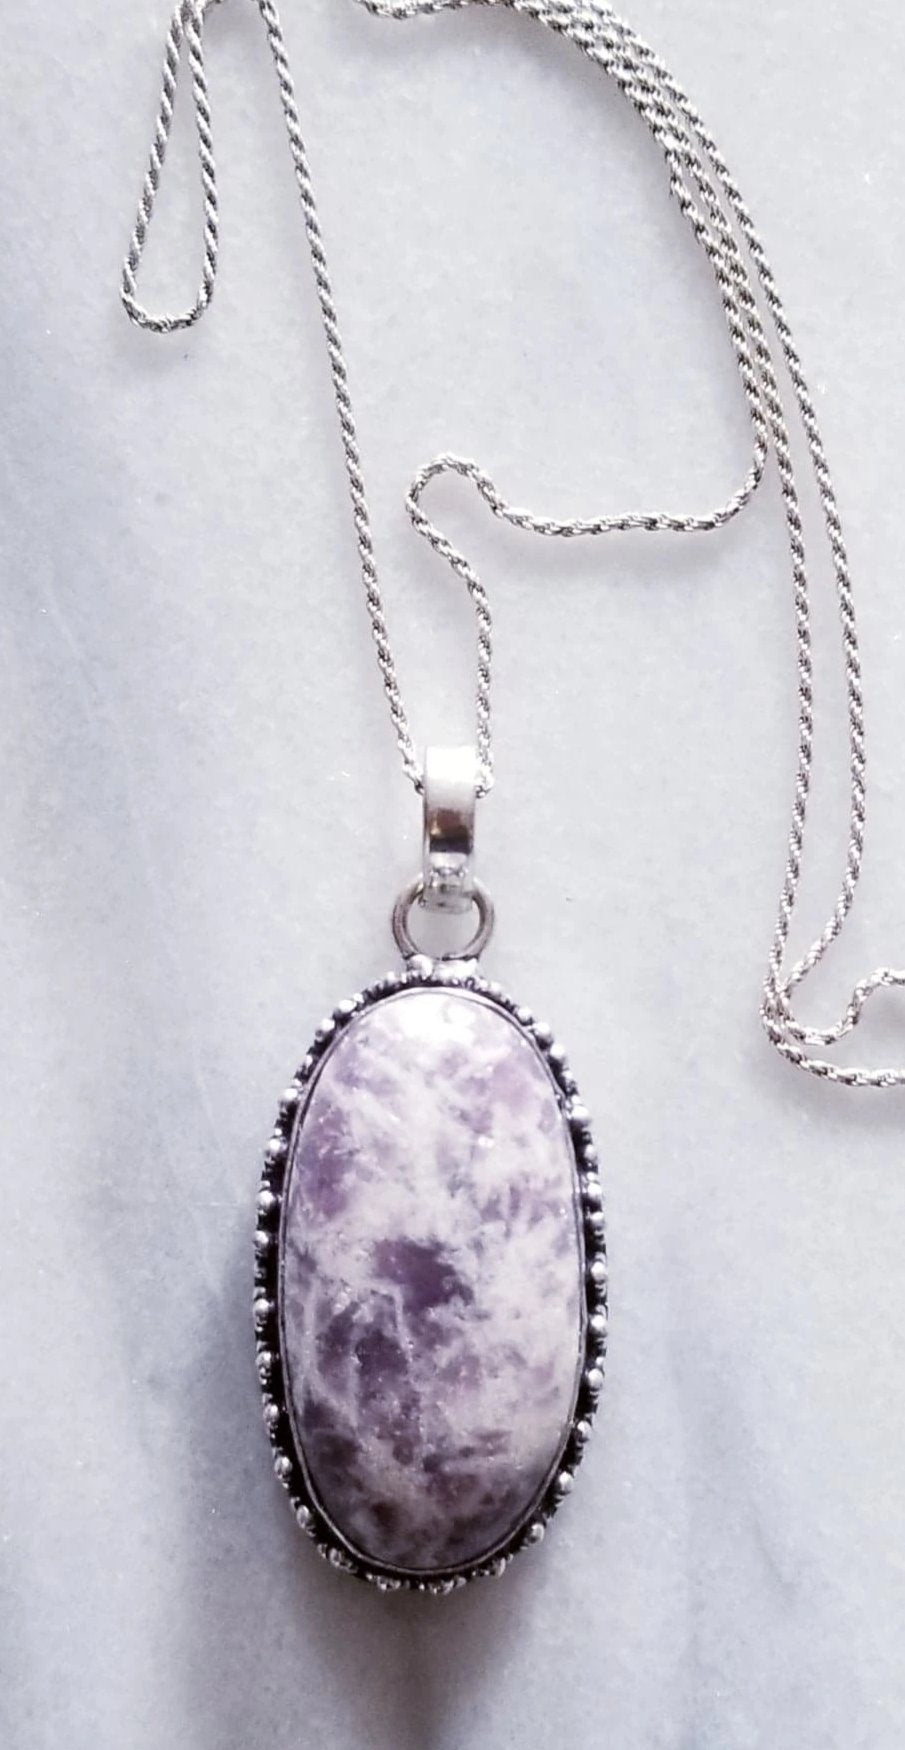 Lepidolite Necklace with Sterling Silver Chain